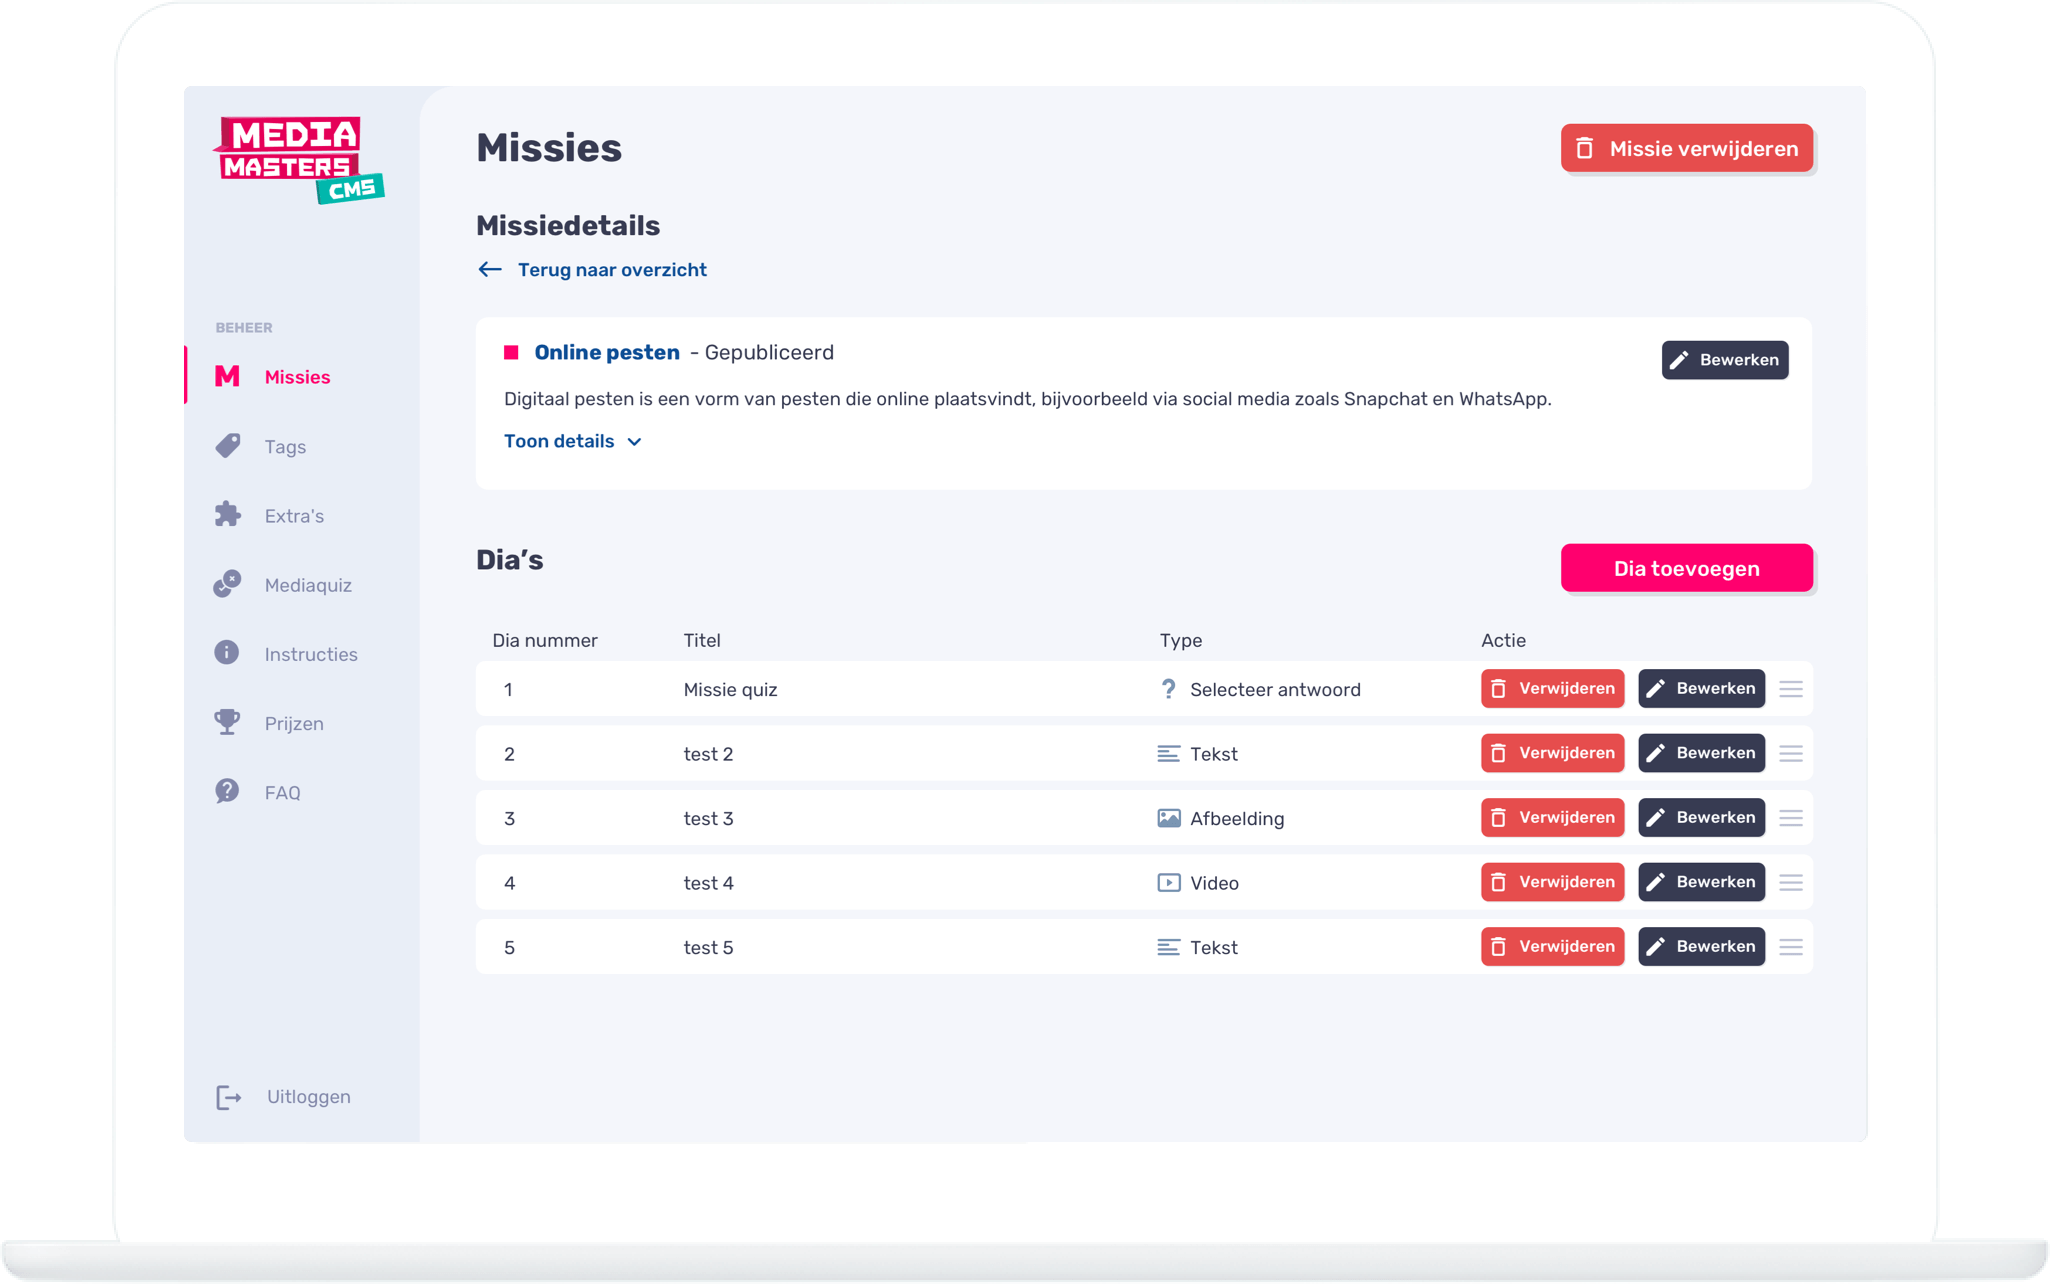 Function CMS - Missiondetails - MediaMasters